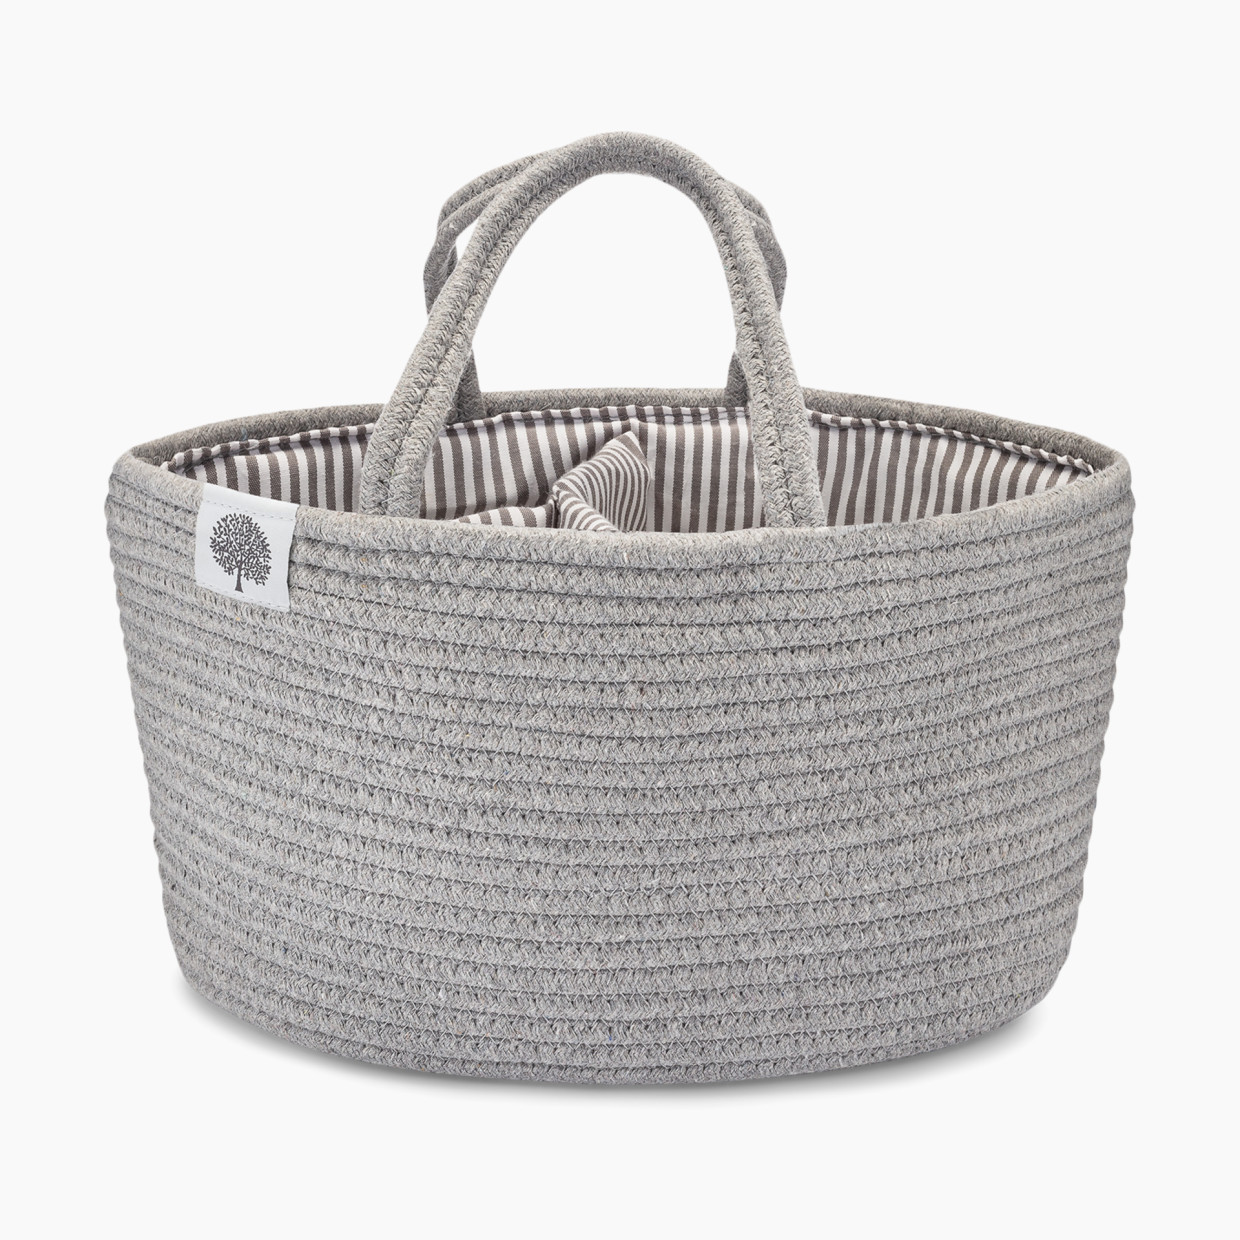 Parker Baby Co. Rope Diaper Caddy - Gray.